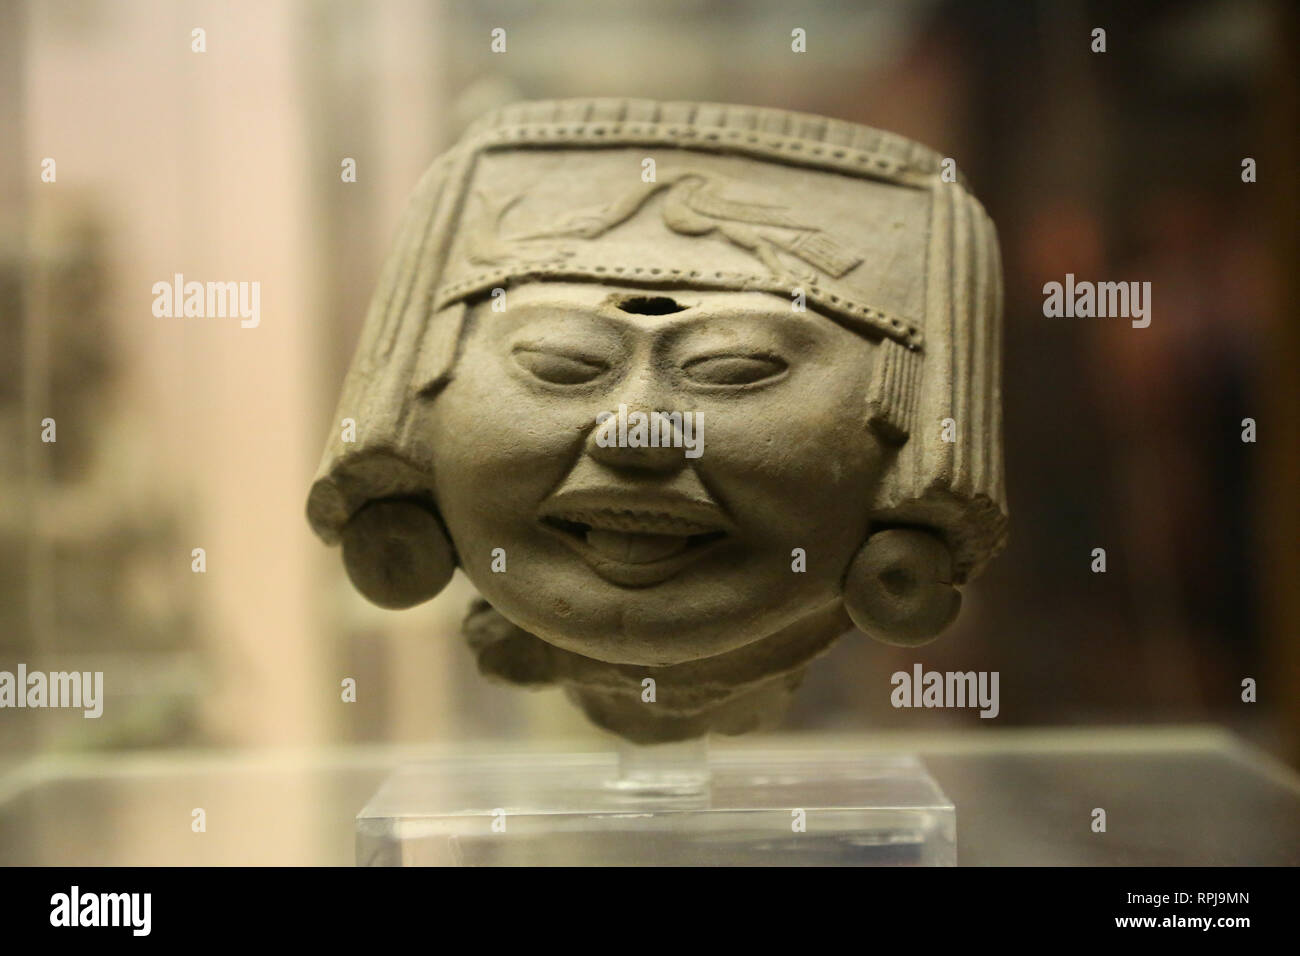 Smiling face. Vera Cruz culture. Mexico. American Museum of Natural History. New York. Unites States. Stock Photo